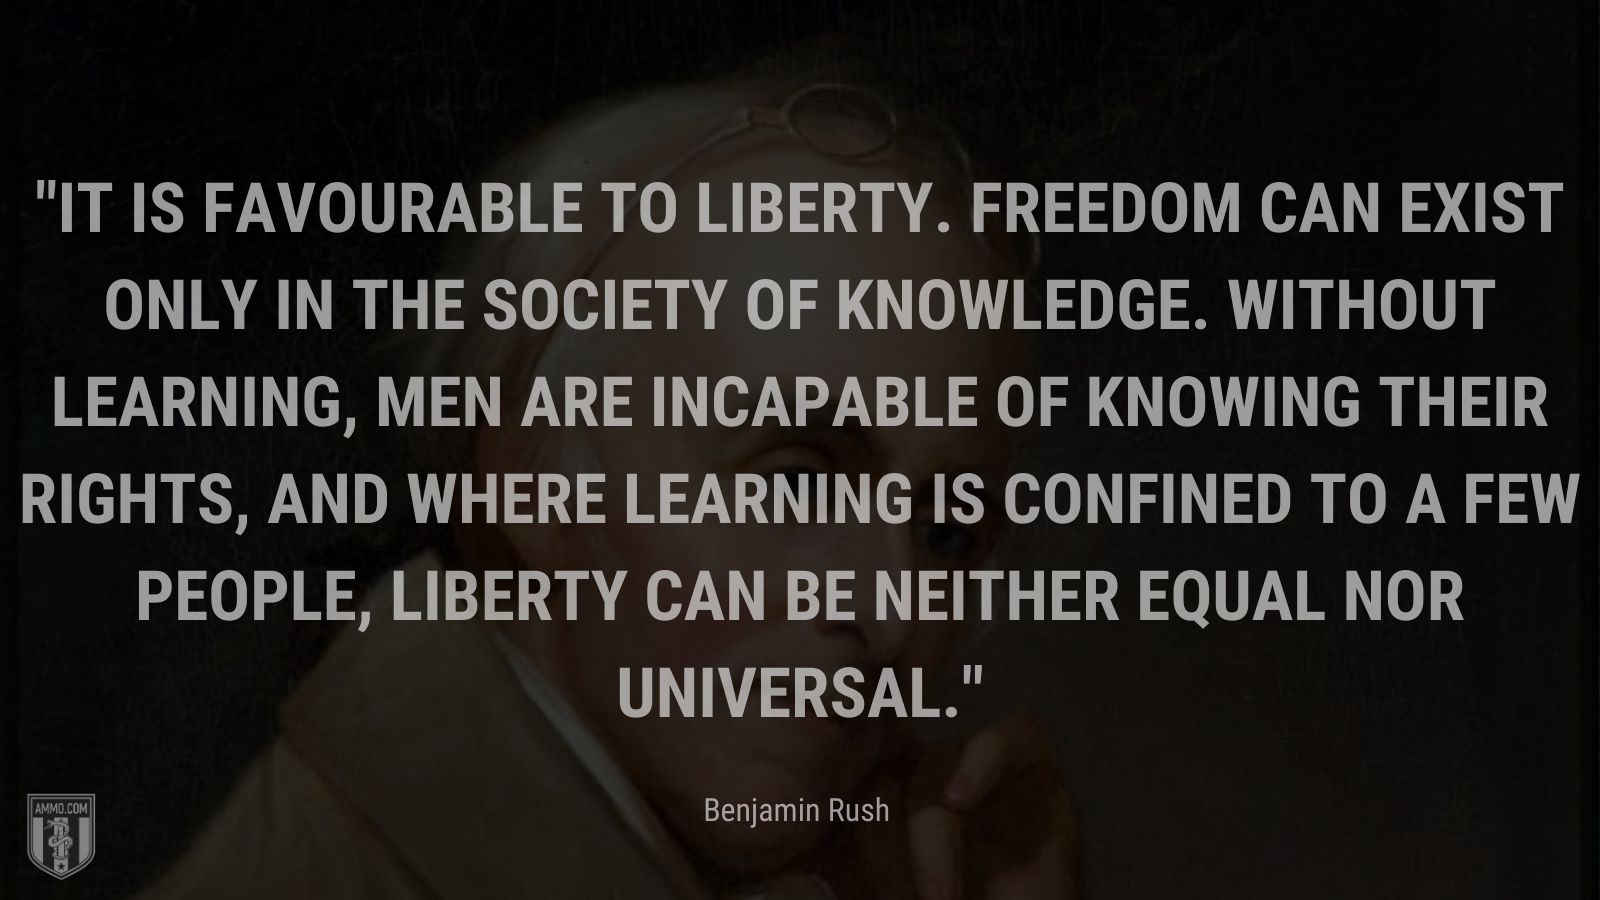 “It is favourable to liberty. Freedom can exist only in the society of knowledge. Without learning, men are incapable of knowing their rights, and where learning is confined to a few people, liberty can be neither equal nor universal.” - Benjamin Rush